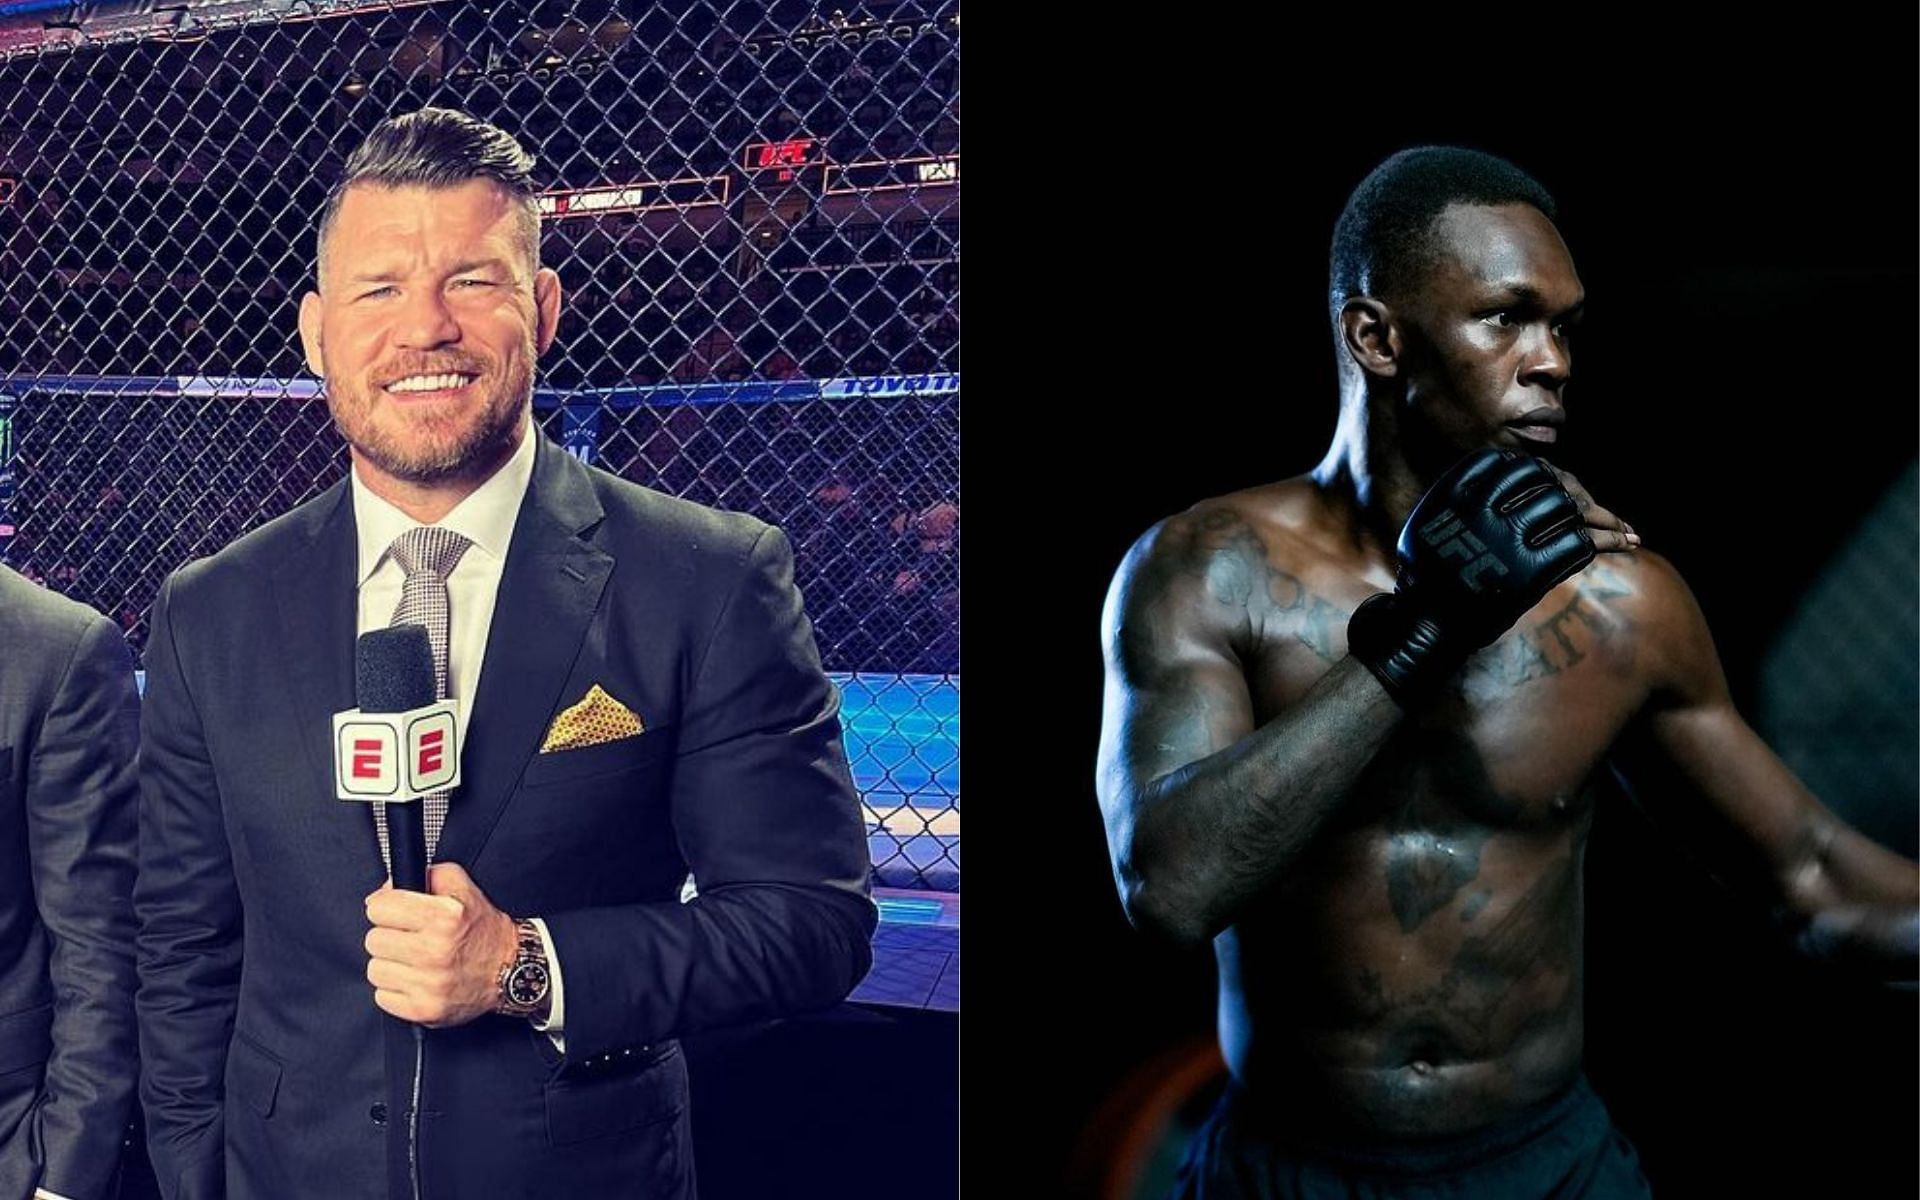 Israel Adesanya (left) and Michael Bisping (right) (Image credits @mikebisping and @stylebender on Instagra,m)